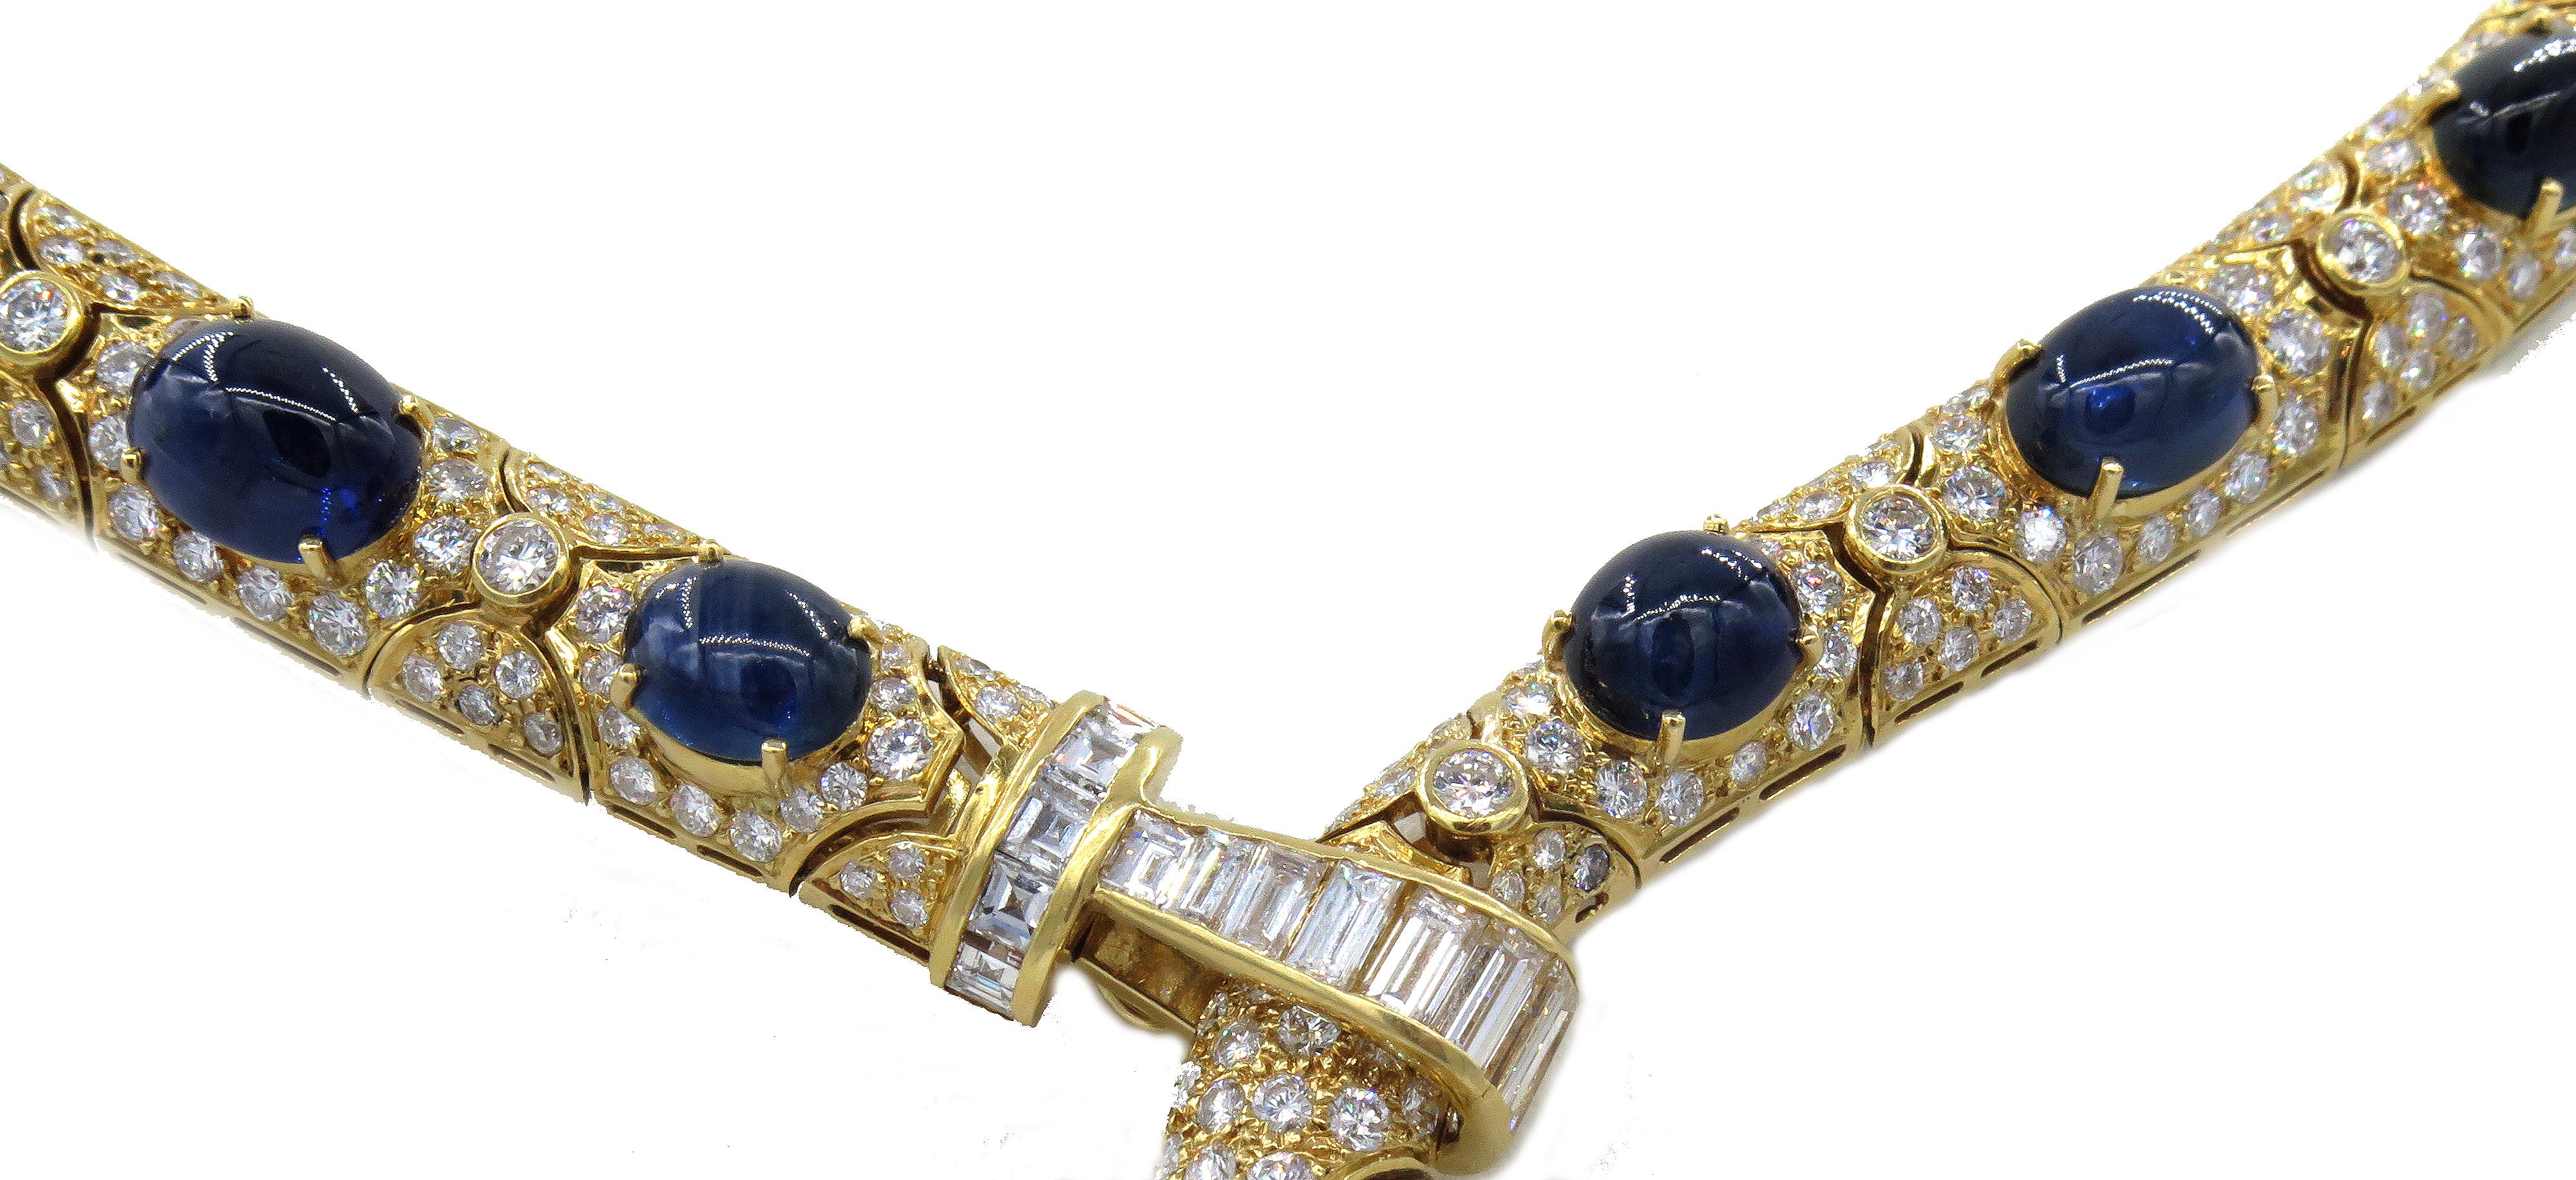 The intricate detail featured in the creation of this Diamond Sapphire Adjustable Necklace is just one of its many striking attributes. There are 25cts of sparkling white diamonds set into the stylish framework of 18k yellow gold. A cabochon cut